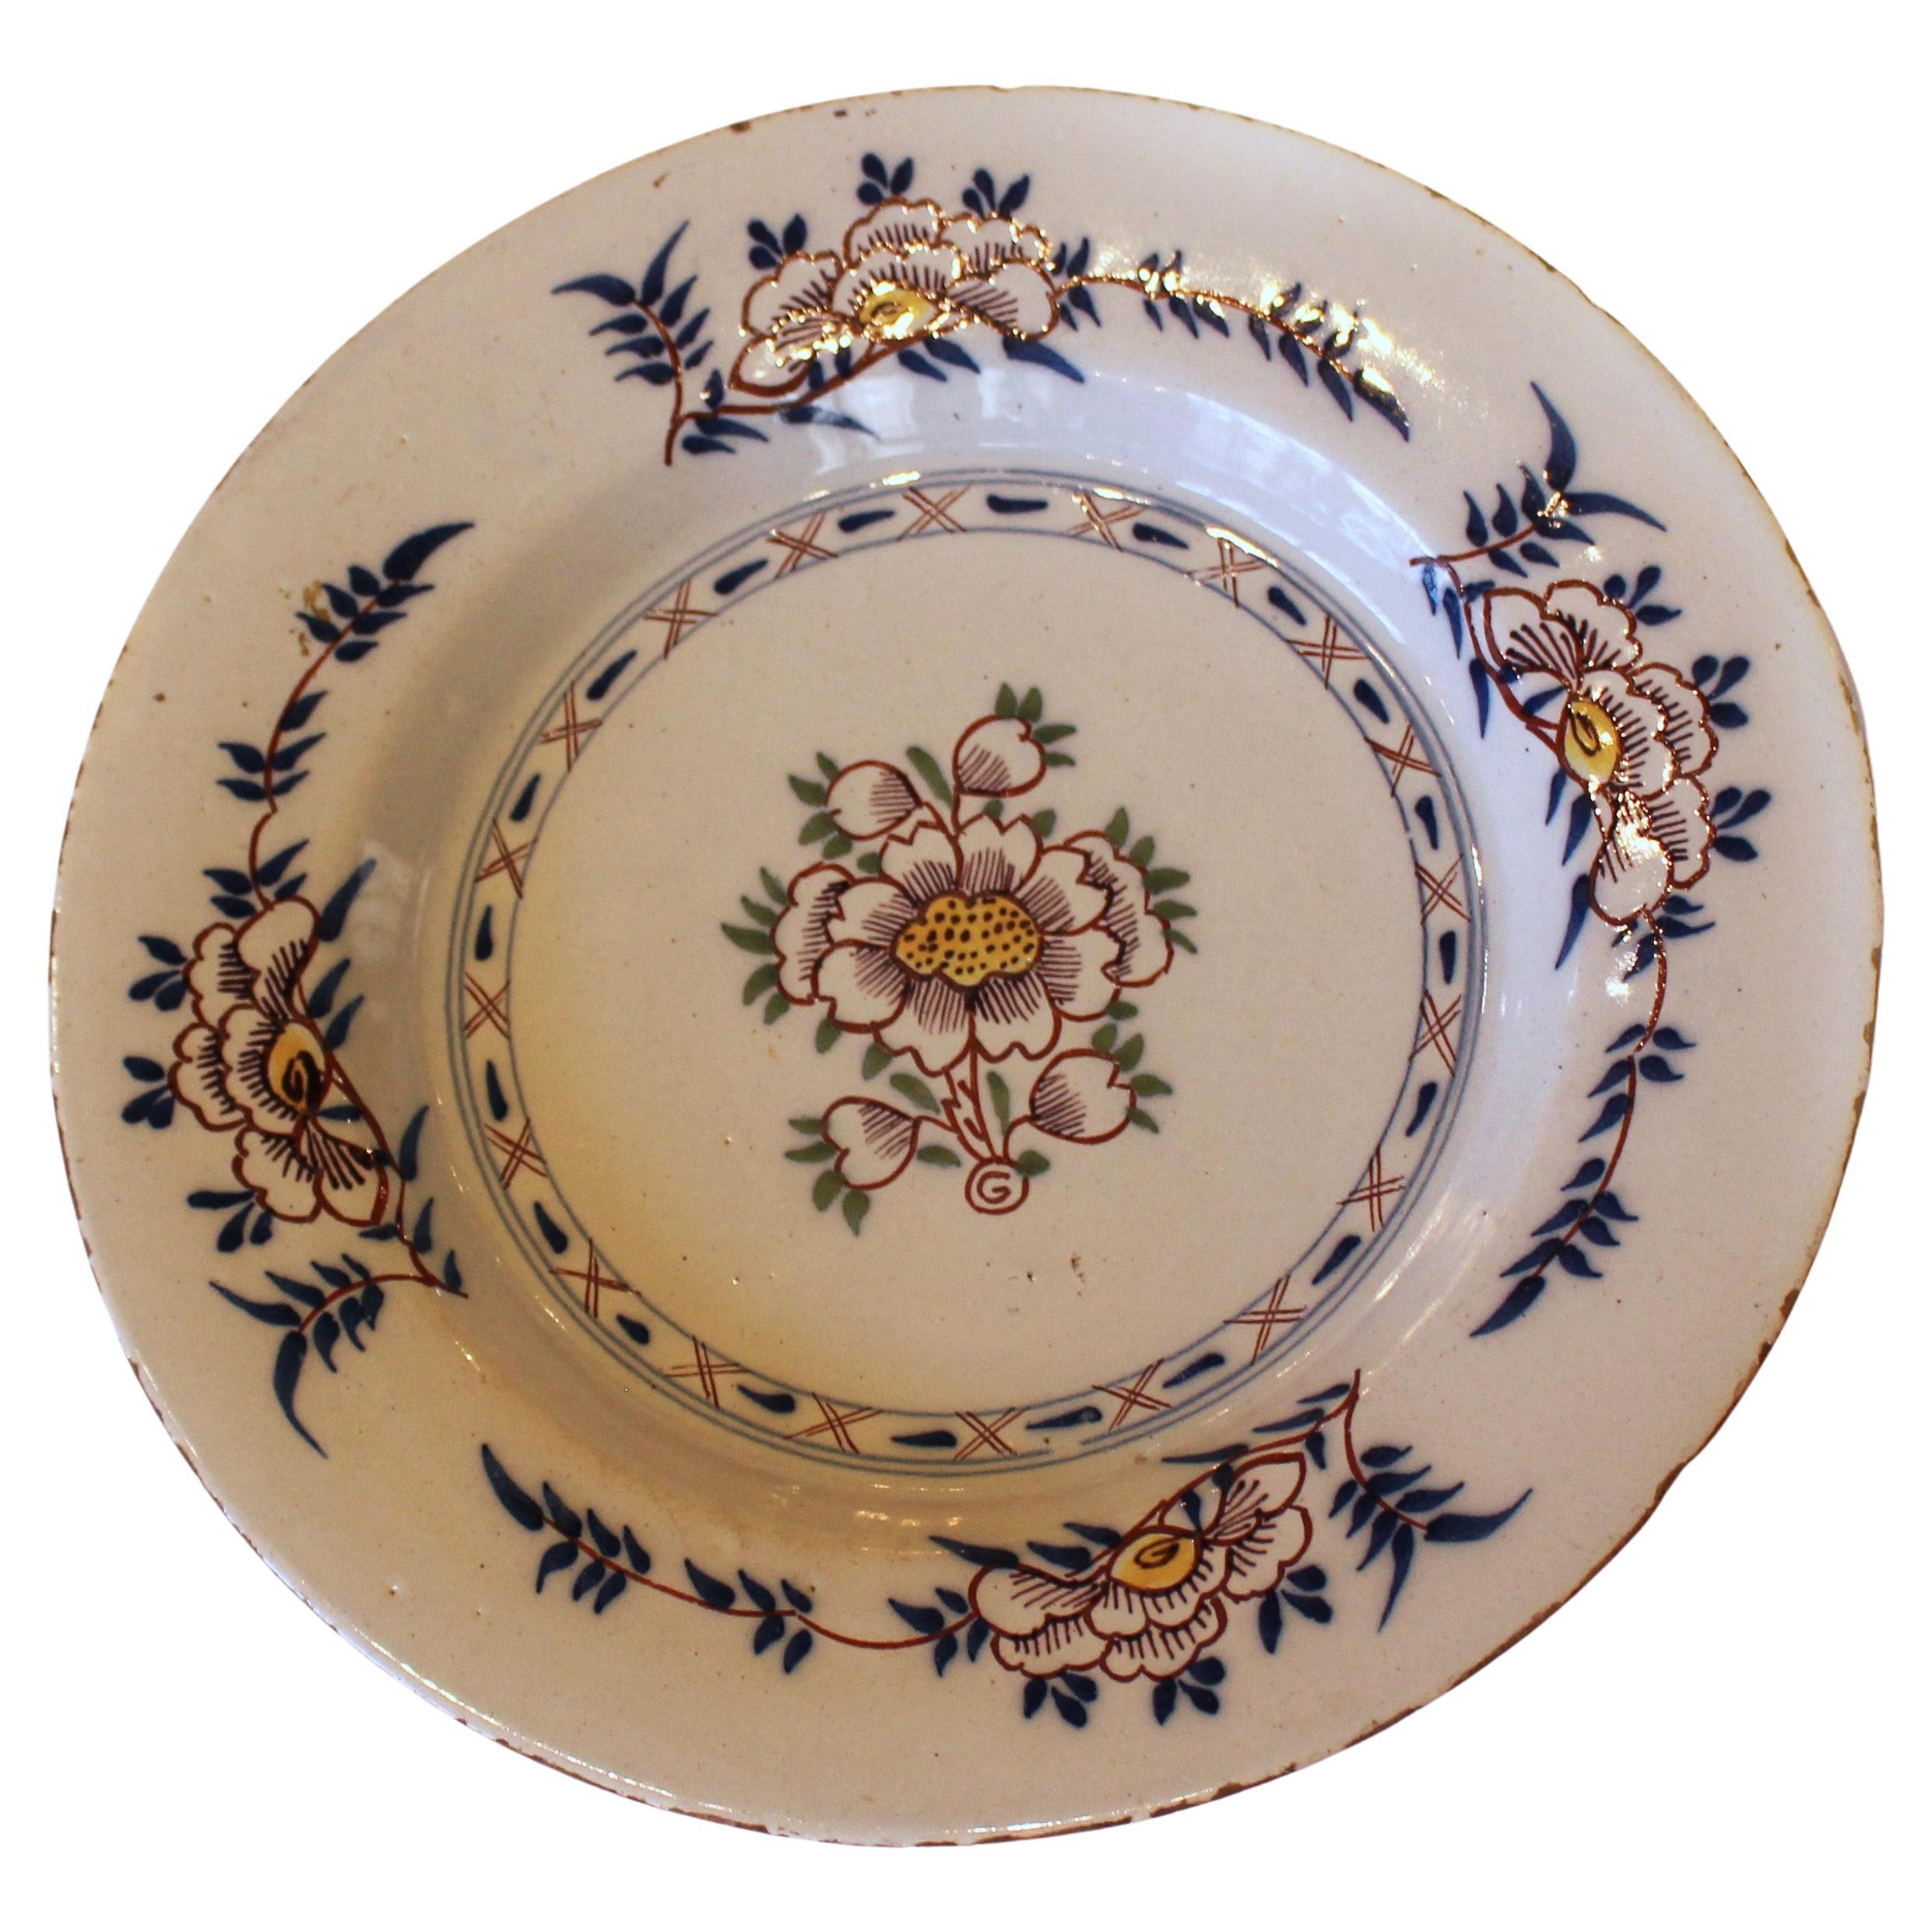 Polychrome Delft Plate with Floral Decoration